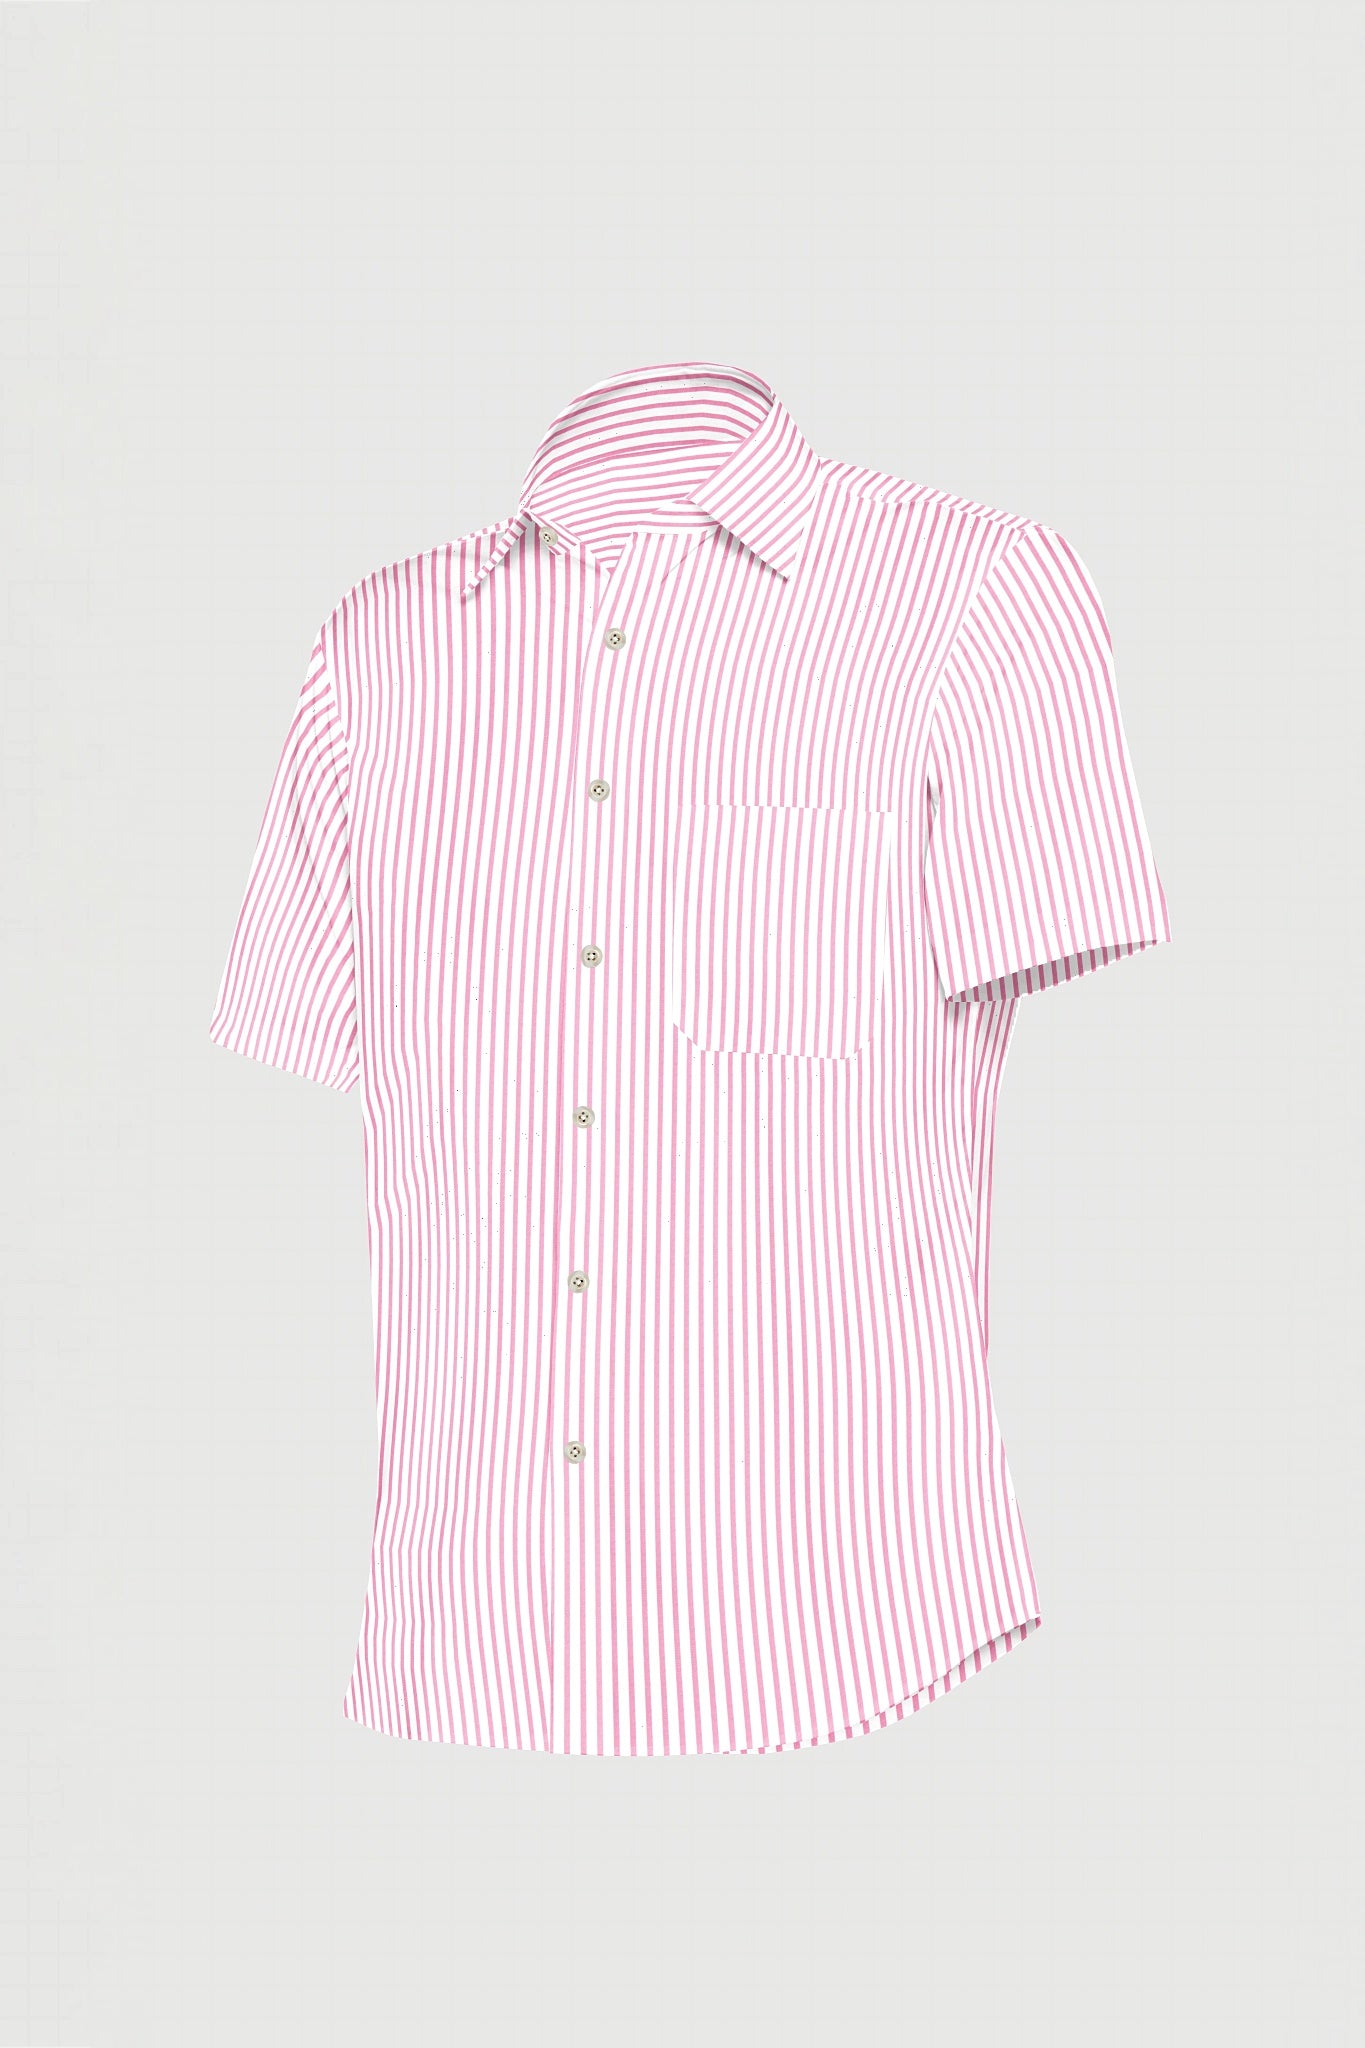 Millennial Pink and White Candy Stripes Cotton Shirt